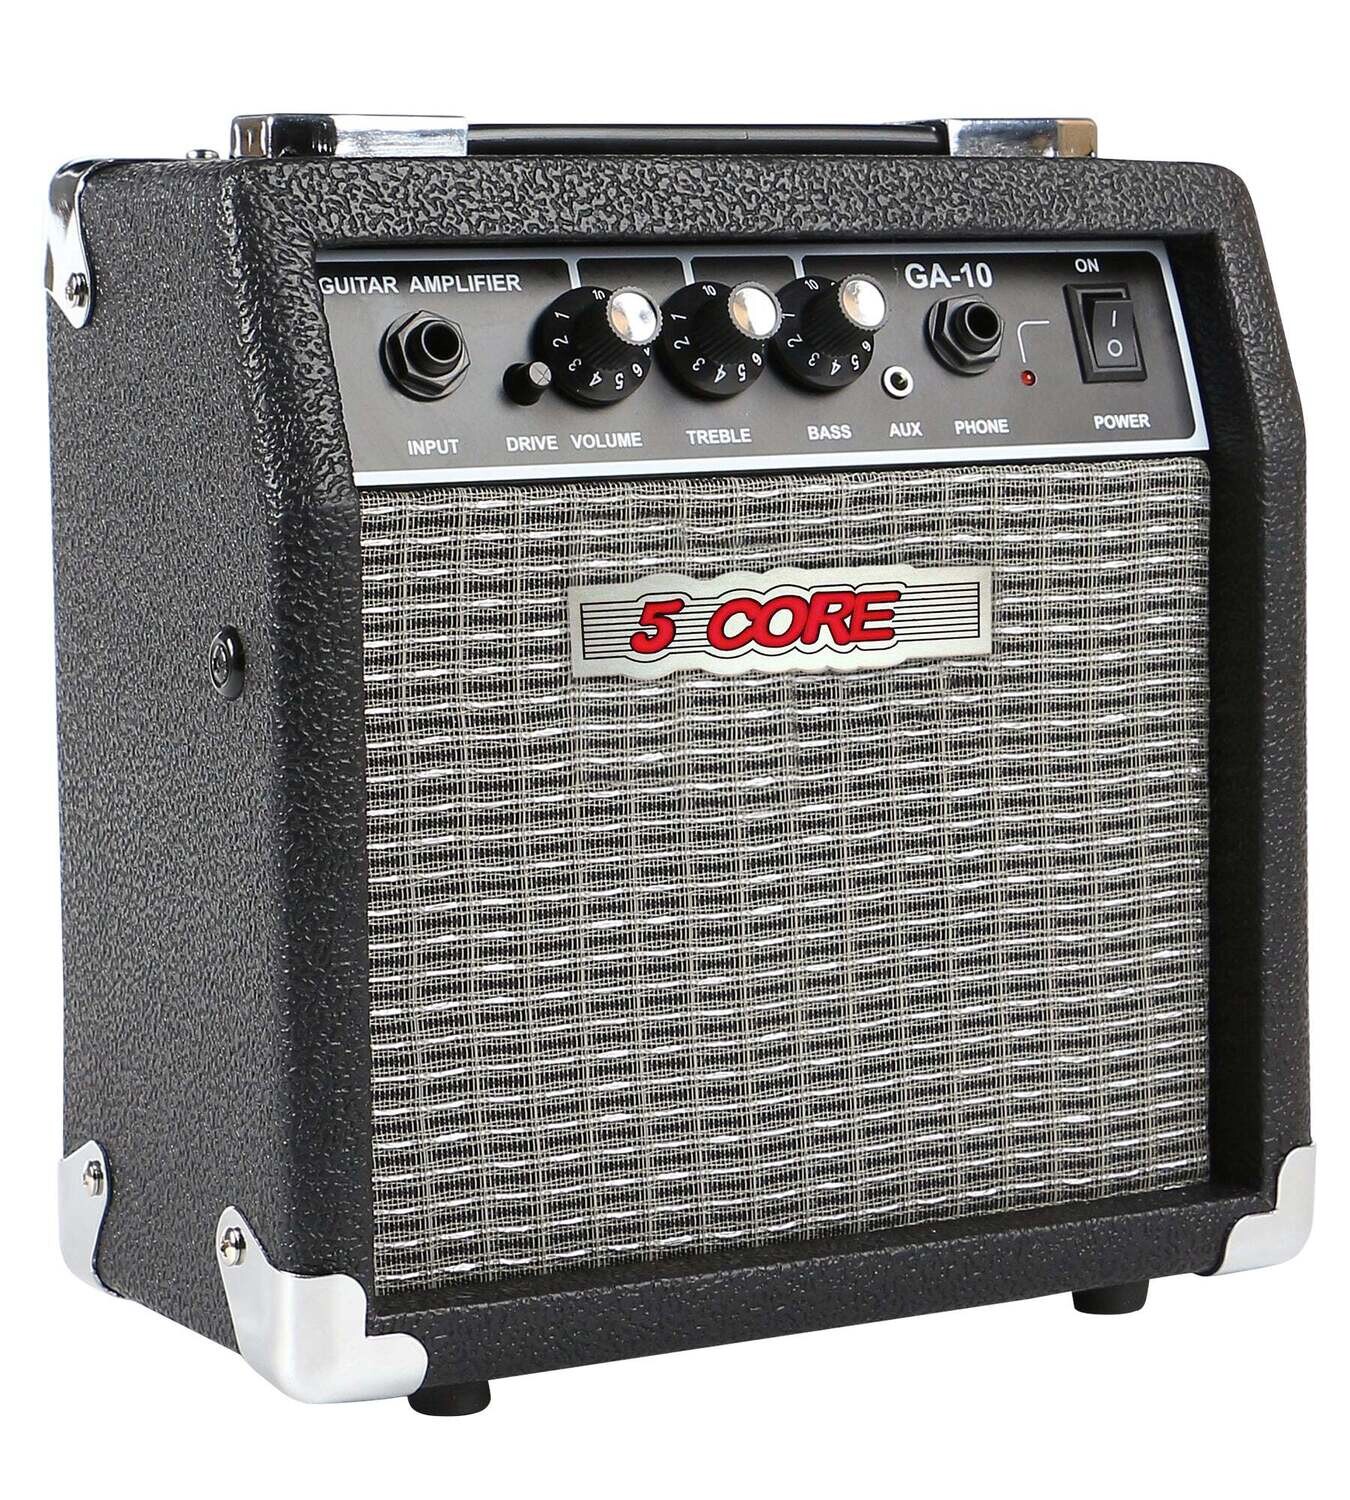 Electric Guitar Amp 10/20/30/40/50 Wattage Amplifier Built in Speaker Headphone Jack & Aux & LineOut Input Includes Bass Treble Volume and Drive Includes